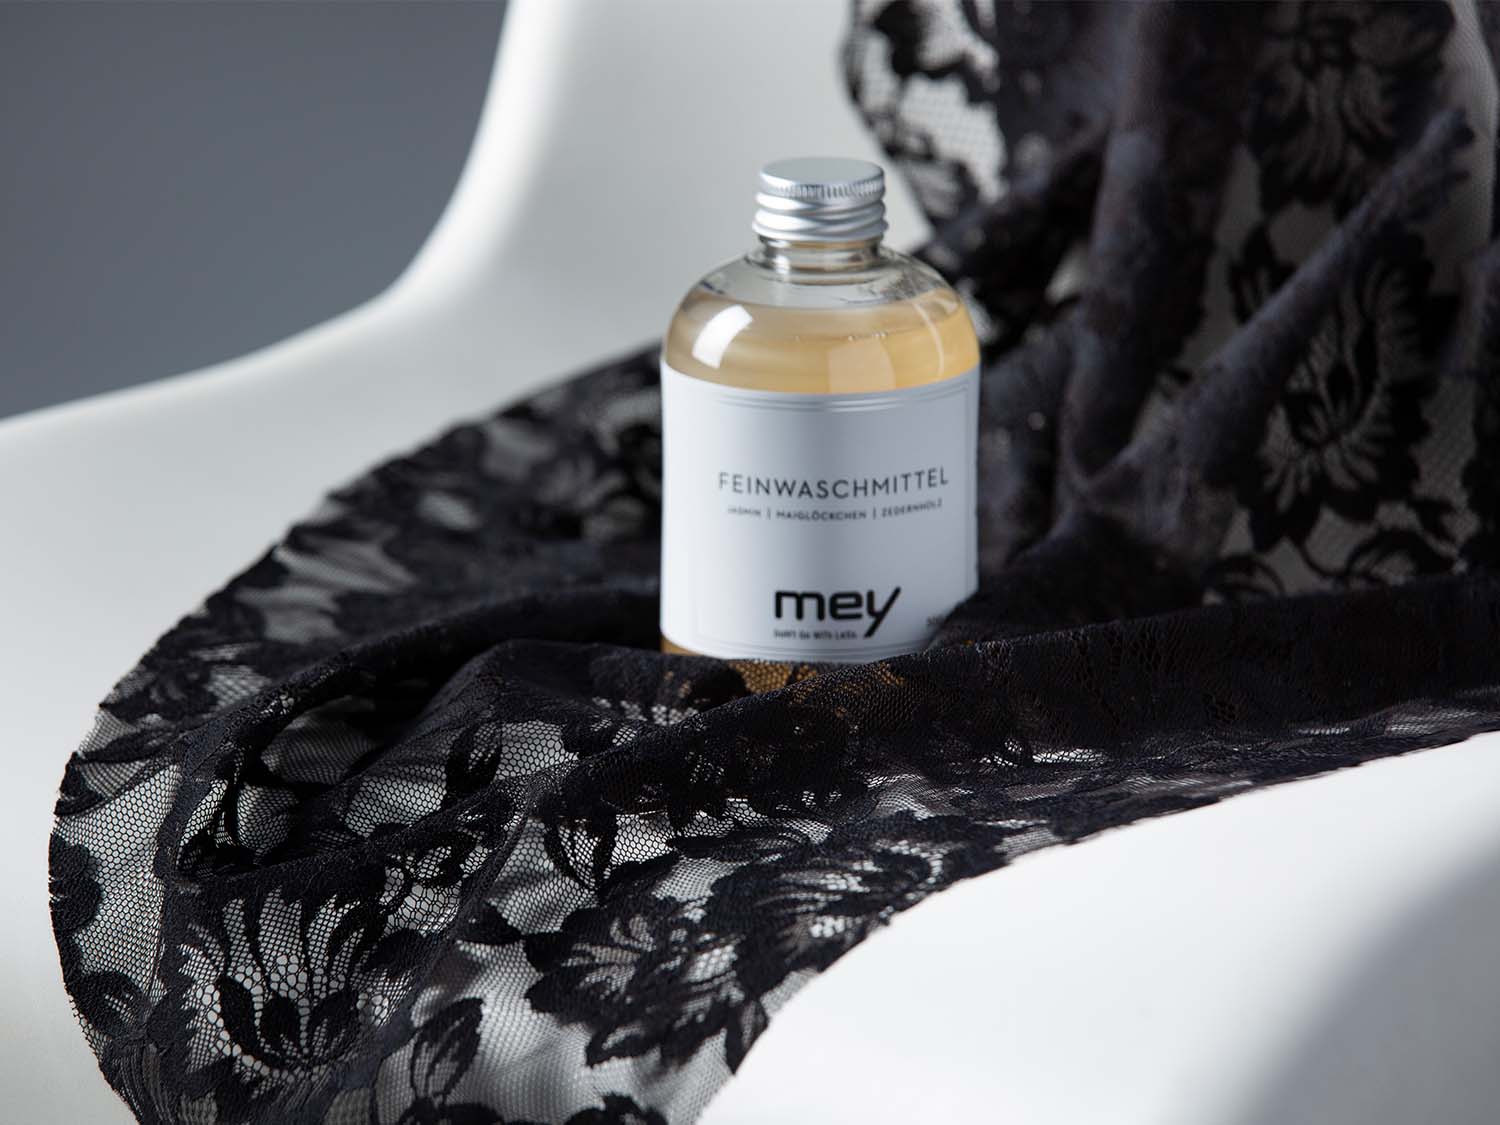 How to wash lace correctly | mey®